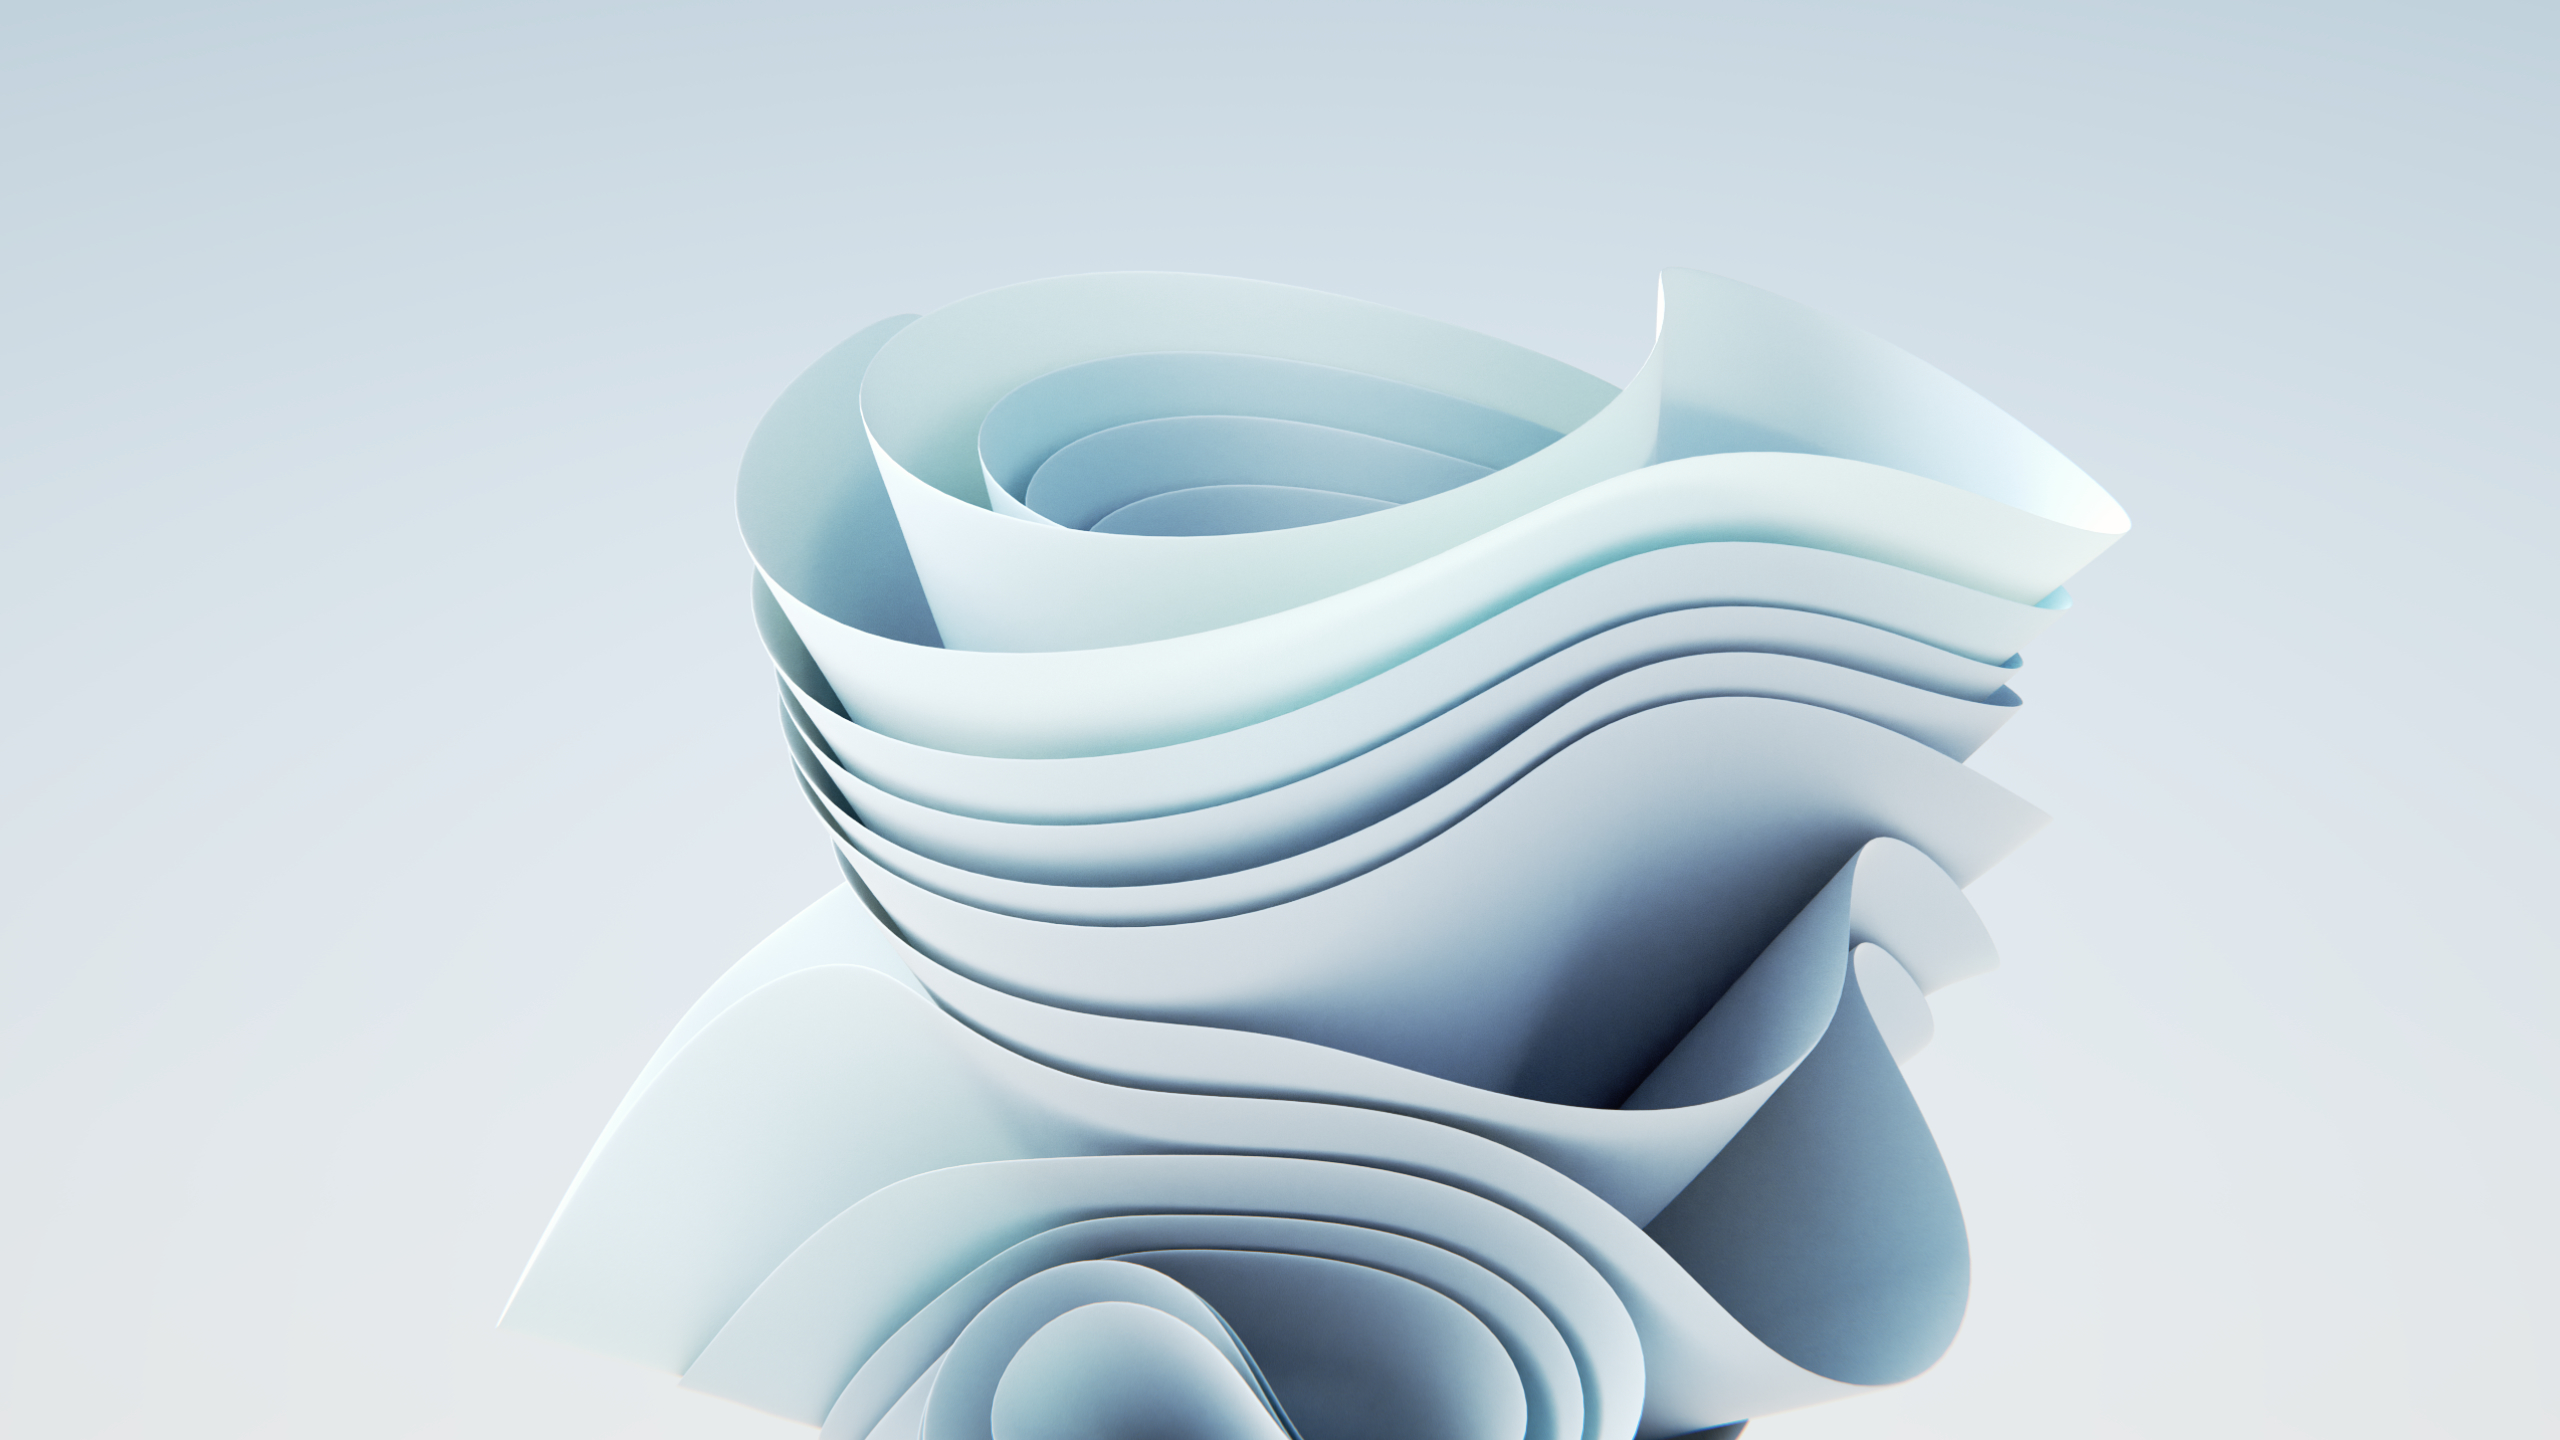 Windows 11 Minimalism Abstract 3D Abstract Blender Render 2560x1440